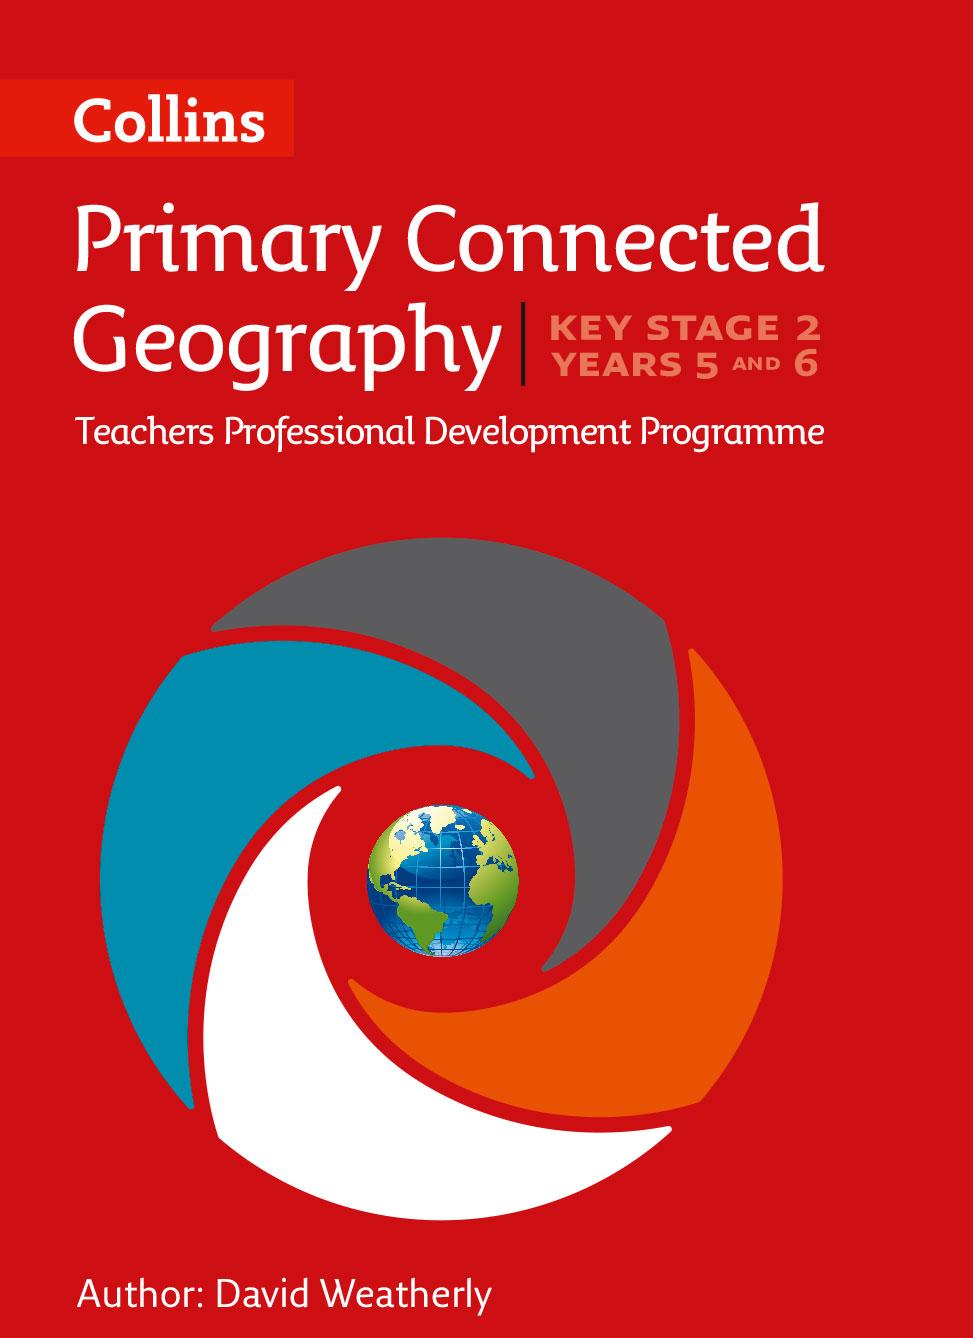 attempts comprehensive coverage at the expense of subject rigour and challenge. A unique aspect of Connected Geography is that it is also a valuable professional development tool for teachers.